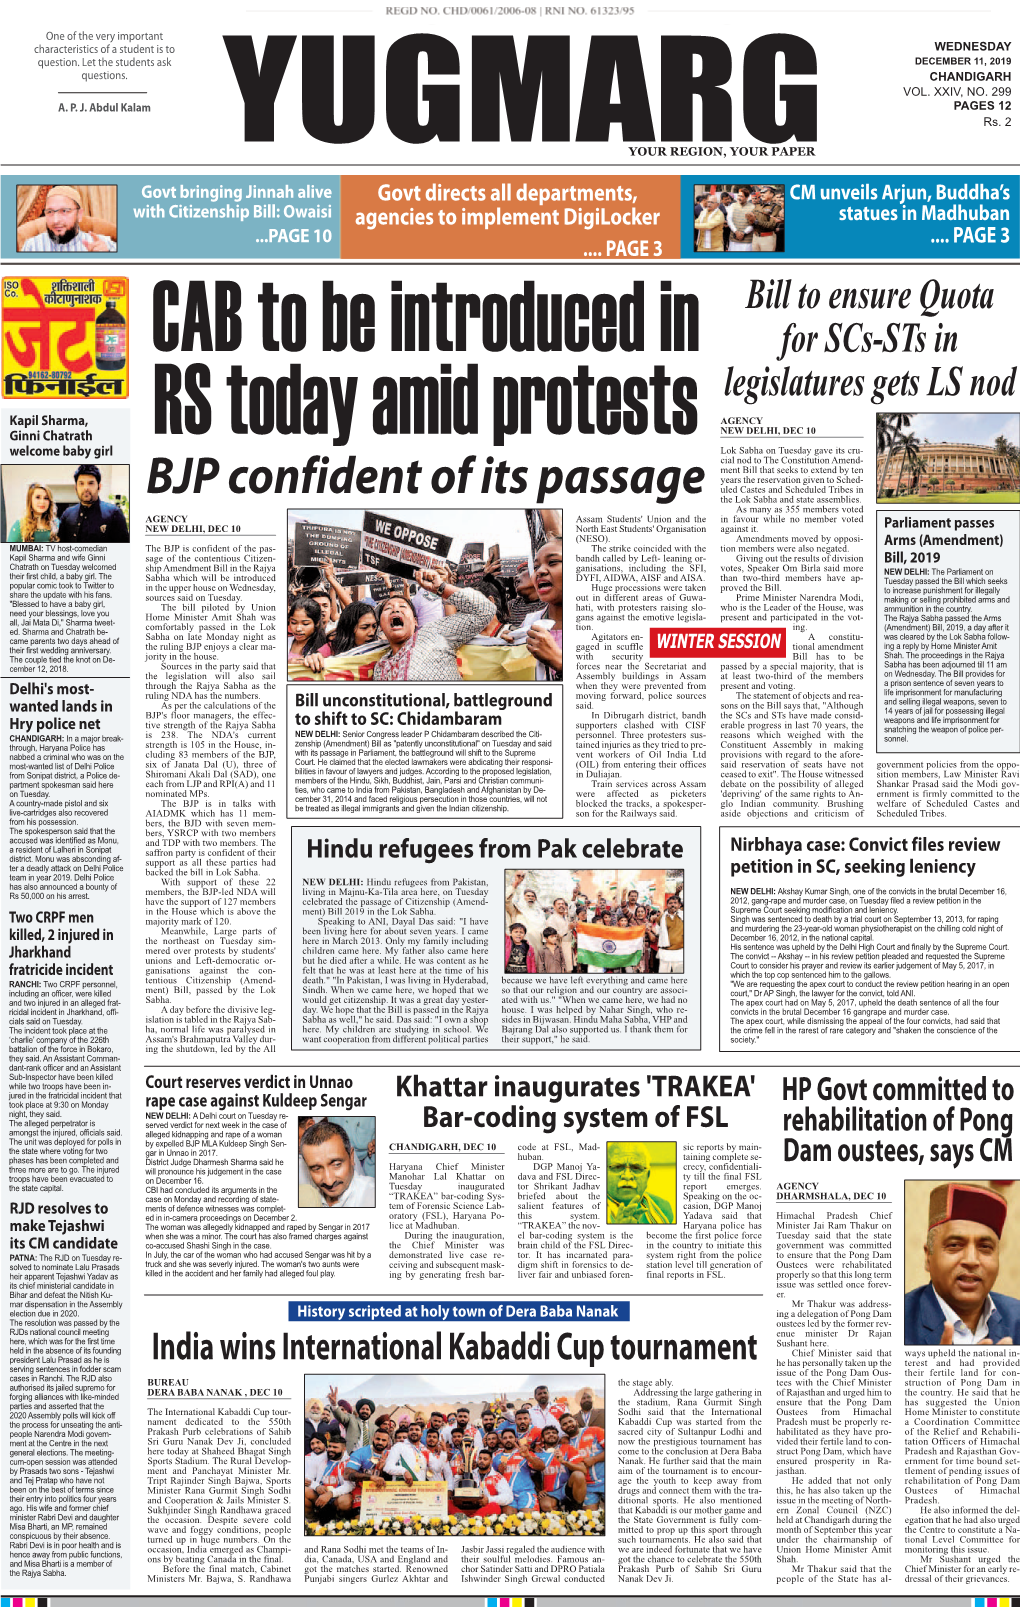 BJP Confident of Its Passage Uled Castes and Scheduled Tribes in the Lok Sabha and State Assemblies